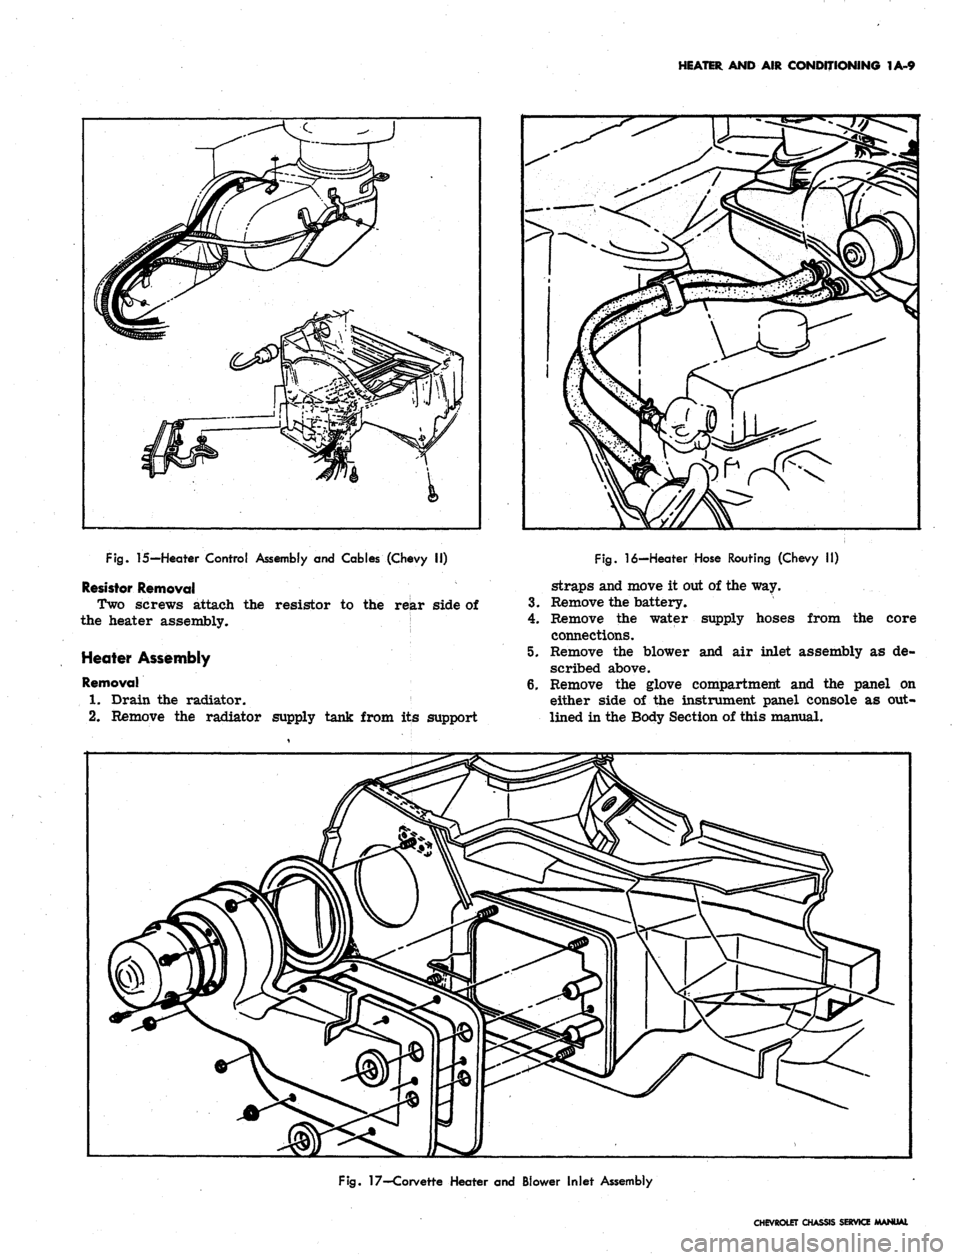 CHEVROLET CAMARO 1967 1.G Chassis Workshop Manual 
HEATER AND AIR CONDITIONING 1A-9

Fig.
 15-Heater Control Assembly and Cables (Chevy II)

Resistor Removal

Two screws attach the resistor to the rear side of

the heater assembly.

Heater Assembly

